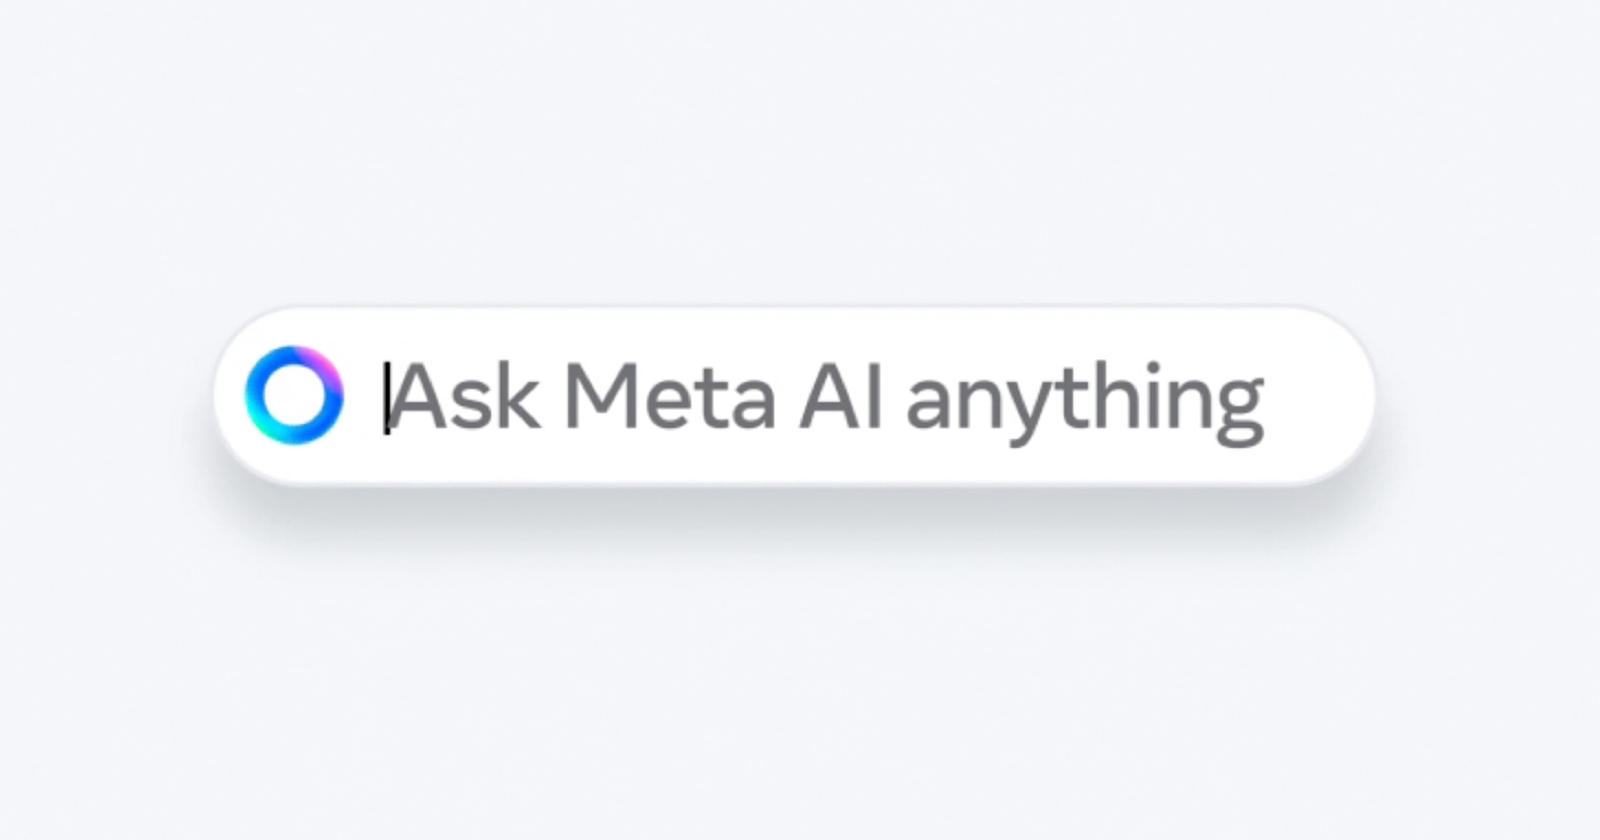 Meta Integrates Google & Bing Search Results Into AI Assistant [Video]